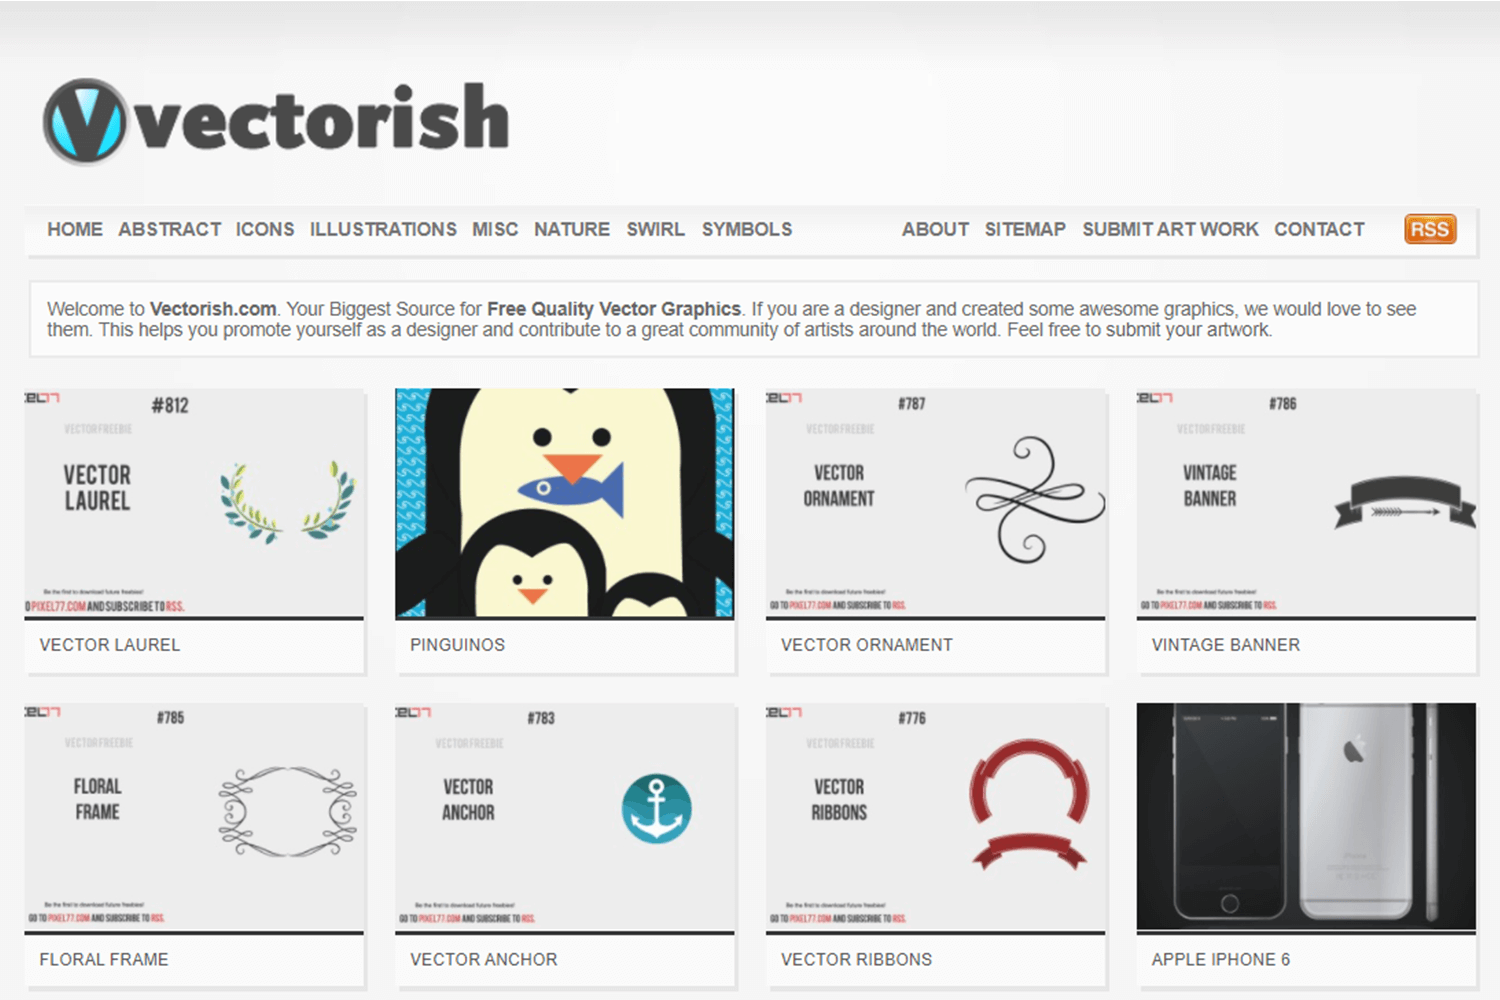 vectorish as place for free vector illustrations